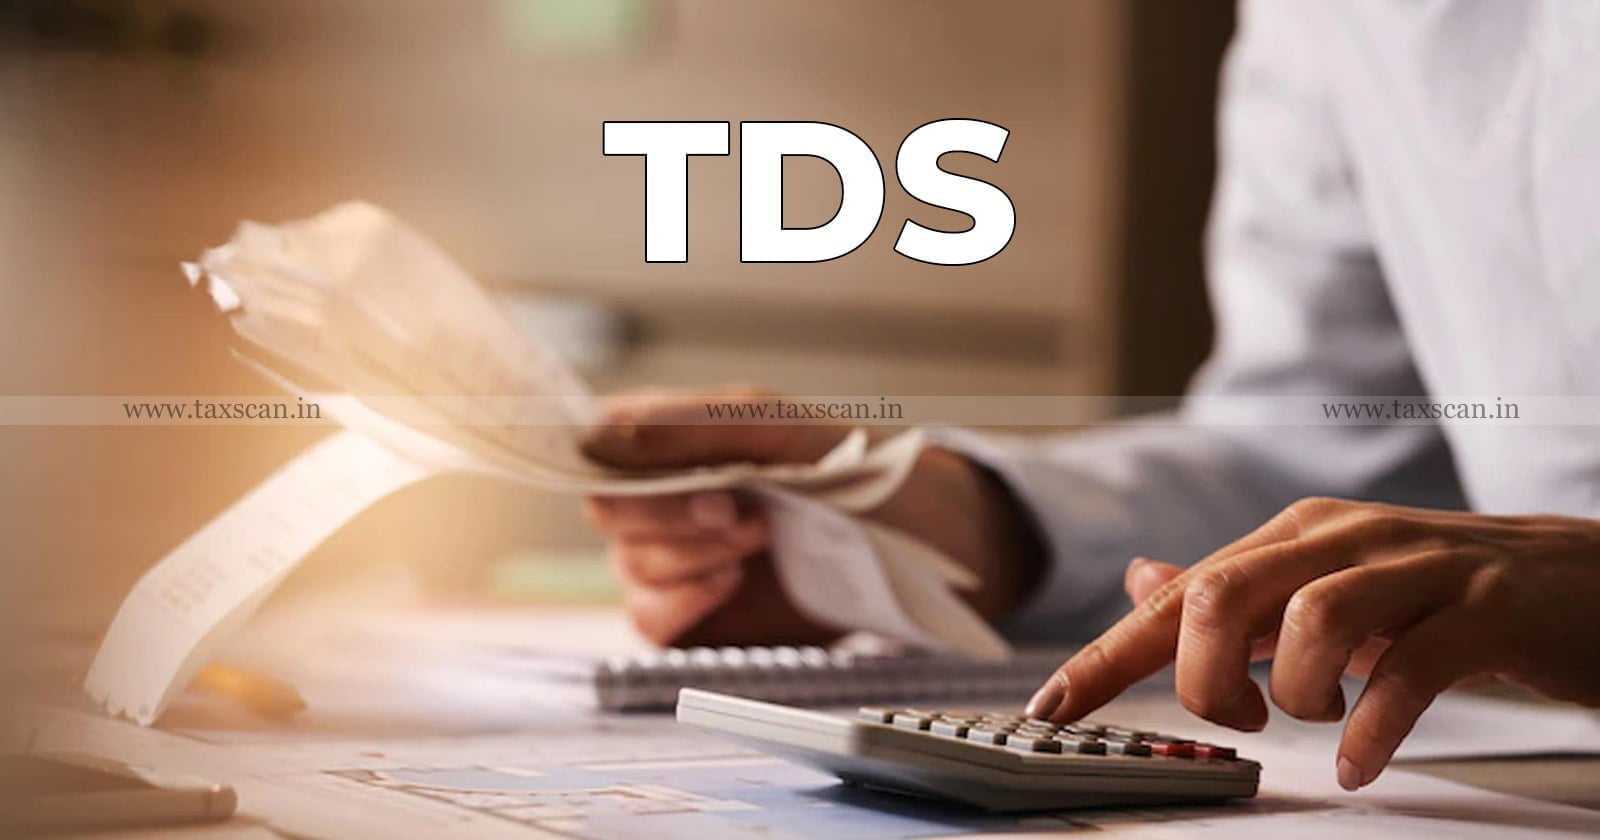 TDS - form 26AS - assessment year - ROI - ITAT - directs - AO - claim - taxsan